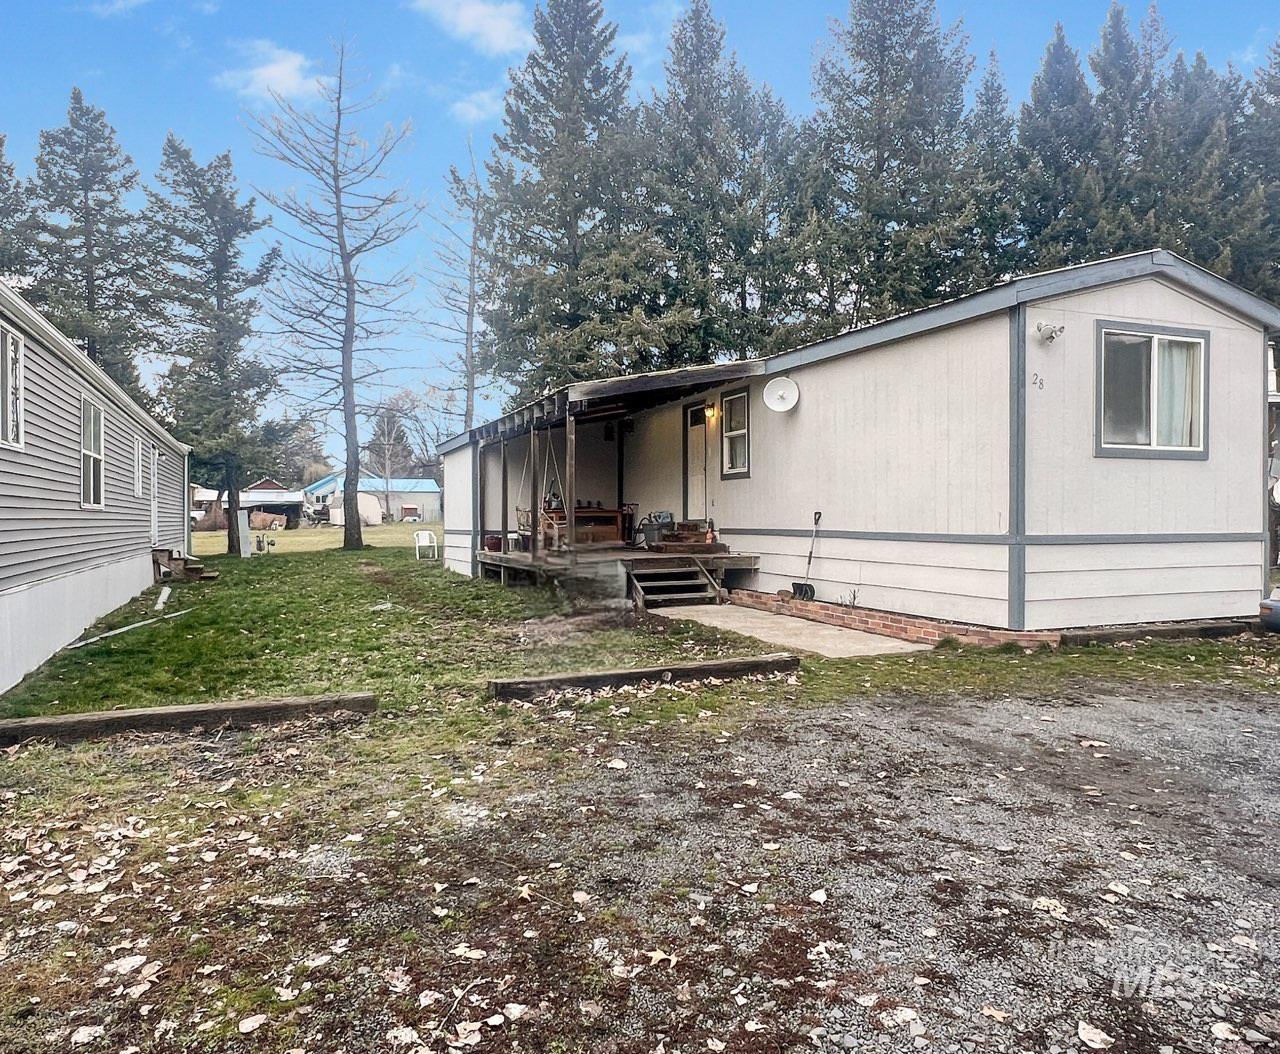 3175 Tomer Rd, Moscow, Idaho 83843, 2 Bedrooms, 1 Bathroom, Residential For Sale, Price $49,000,MLS 98901047